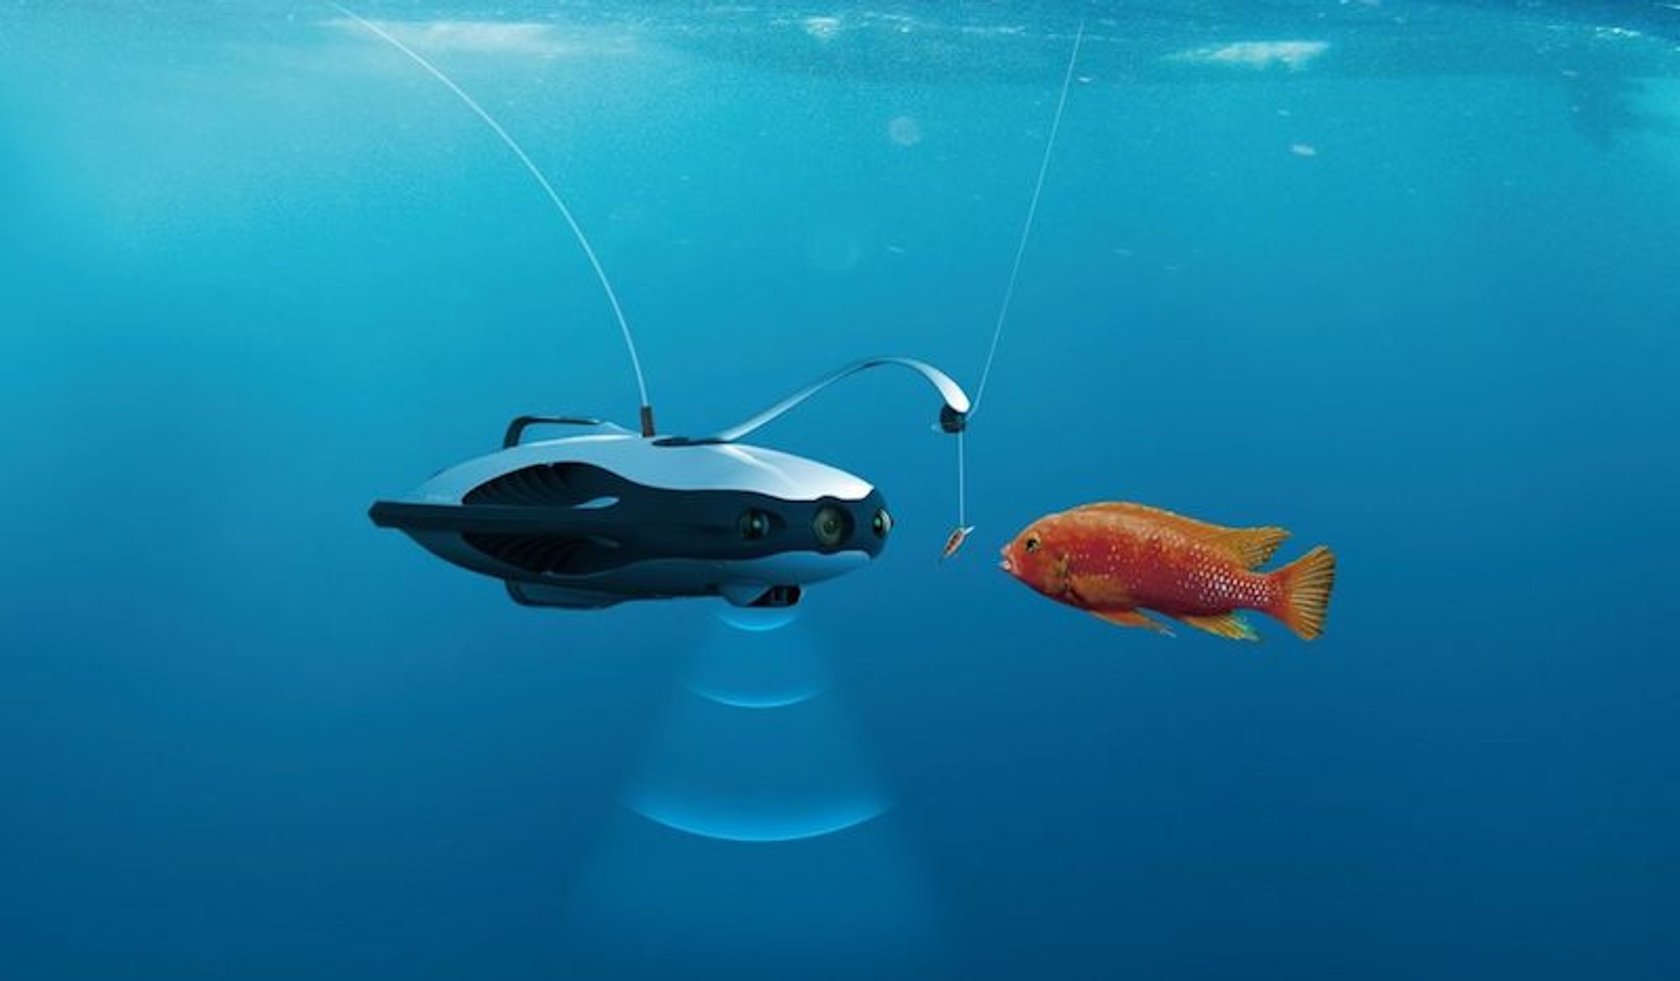 8 Best Underwater Drones for Sale [2021] - With Camera